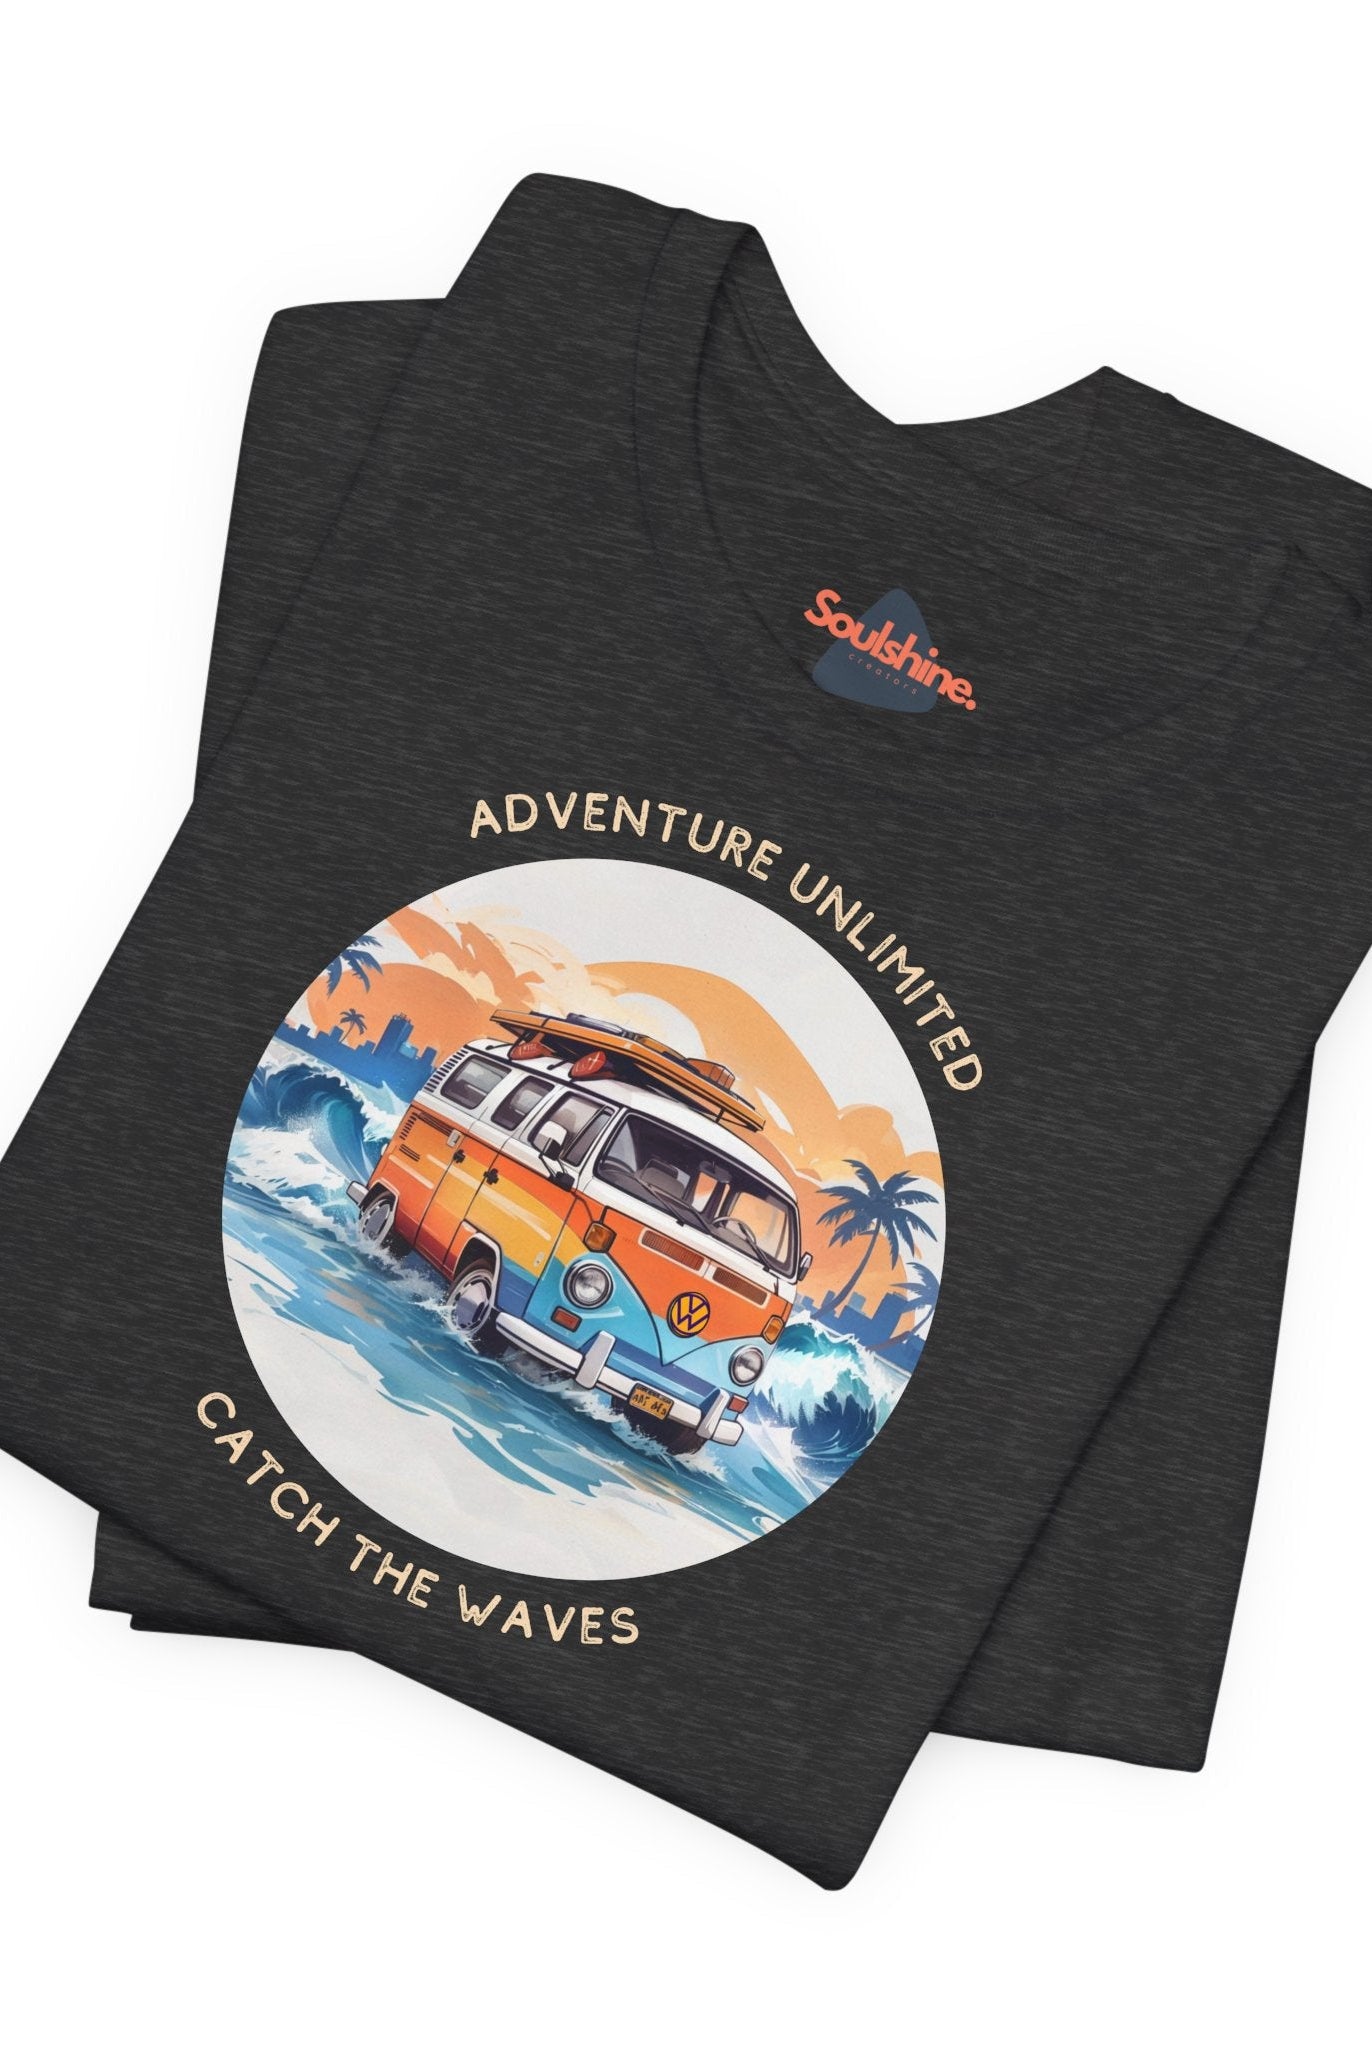 Adventure Unlimited direct-to-garment printed Surfing T-Shirt by Soulshinecreators